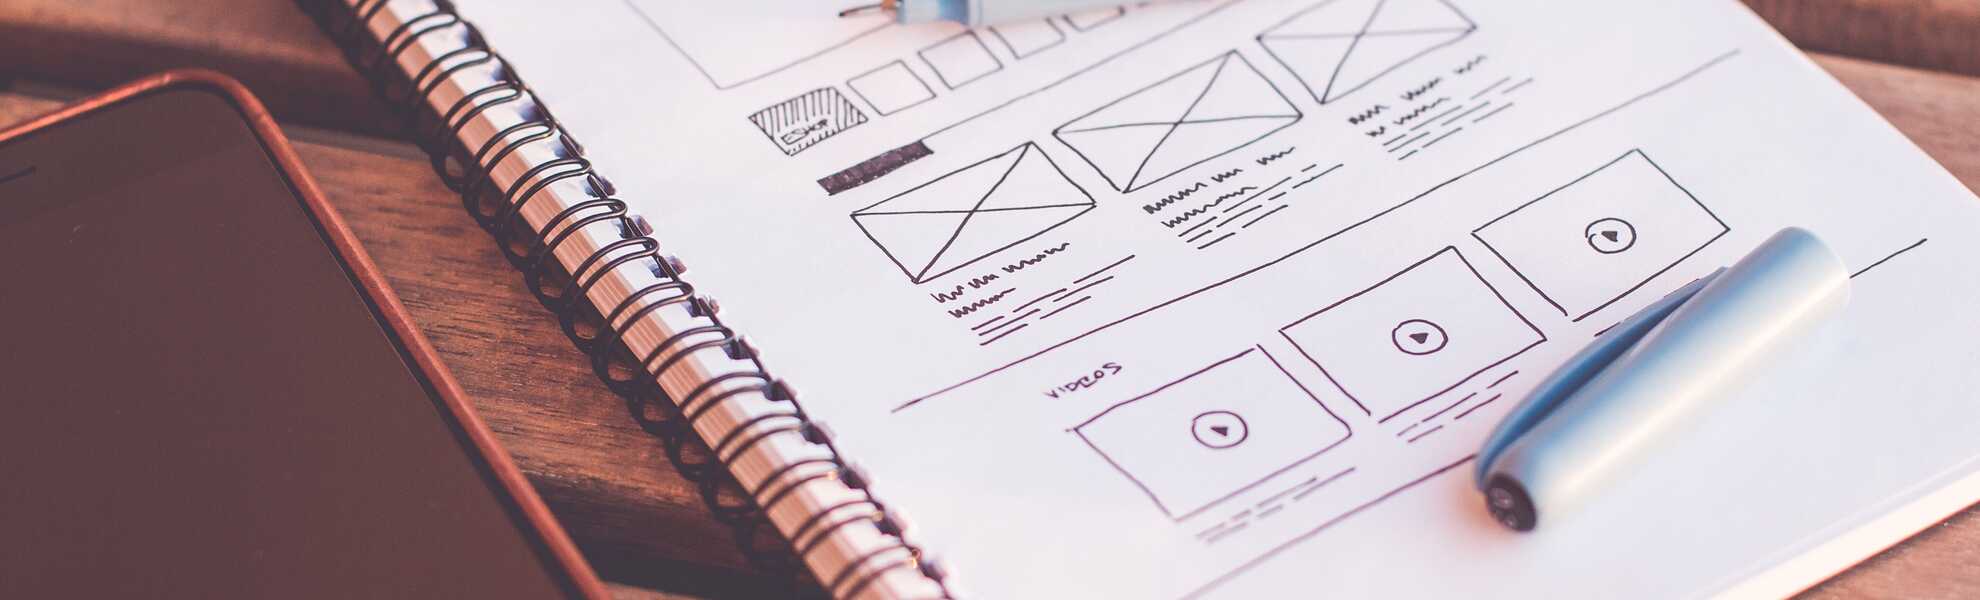 10 Signs Your Current Website Is Outdated and Needs to be Redesigned